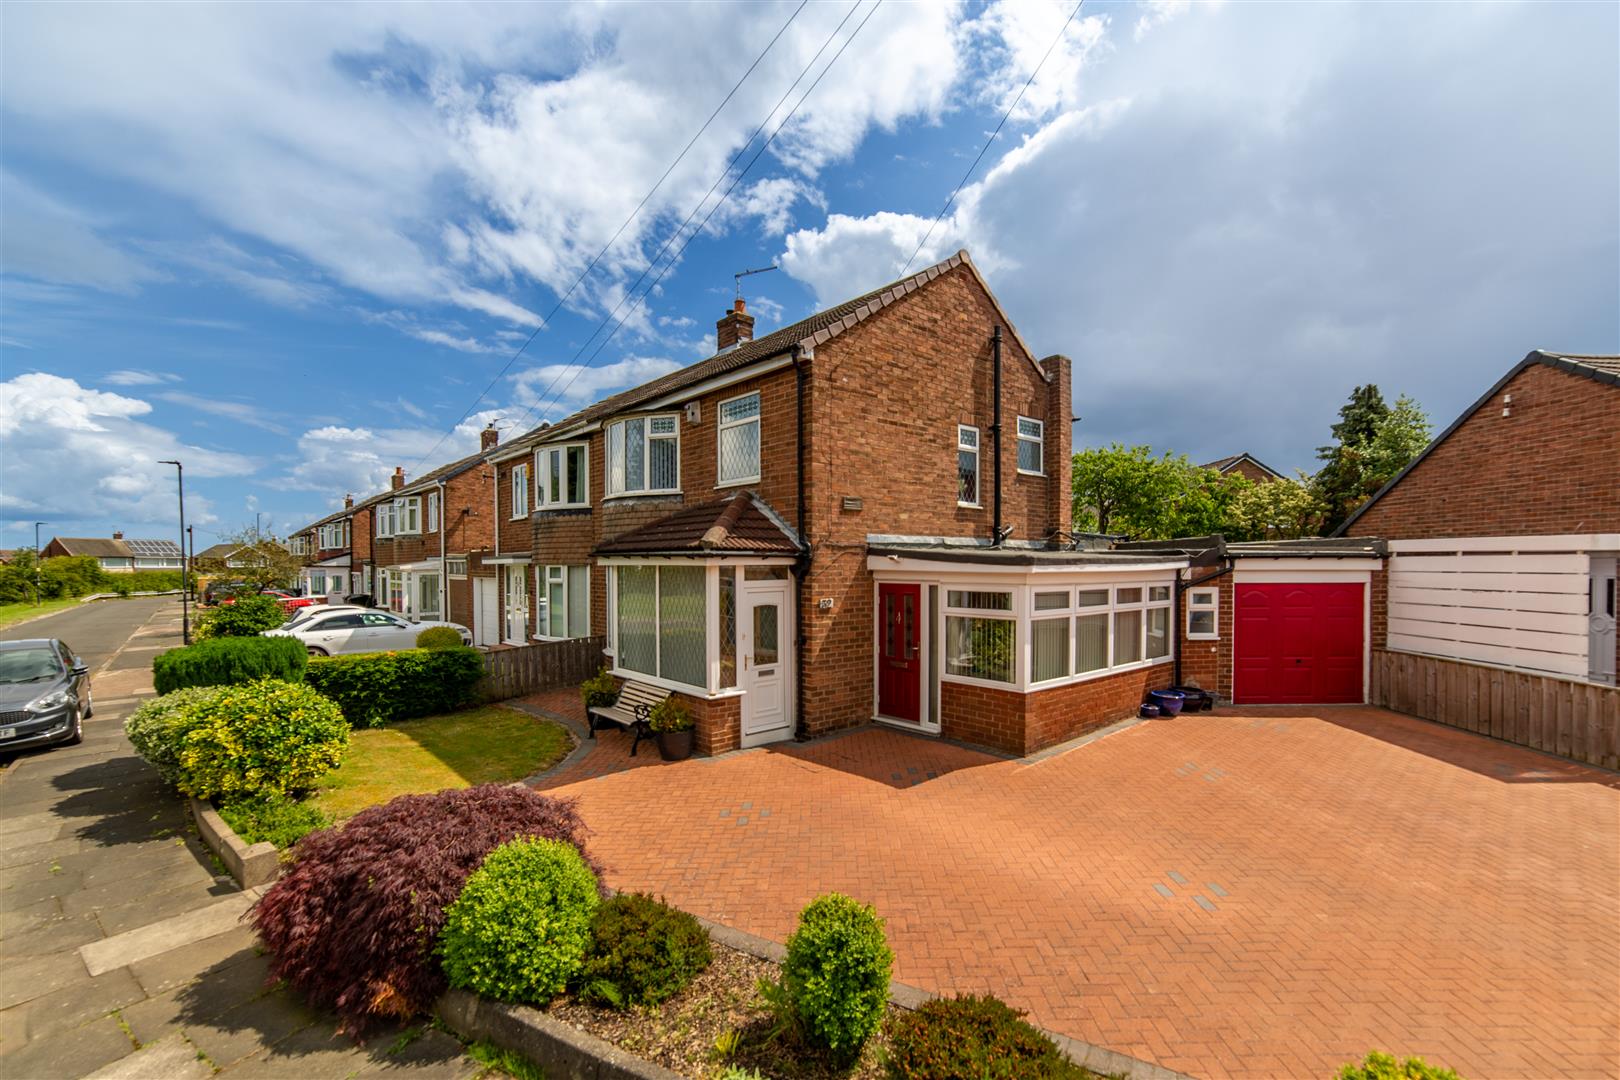 3 bed semi-detached house for sale in Blanchland Avenue, Wideopen, NE13